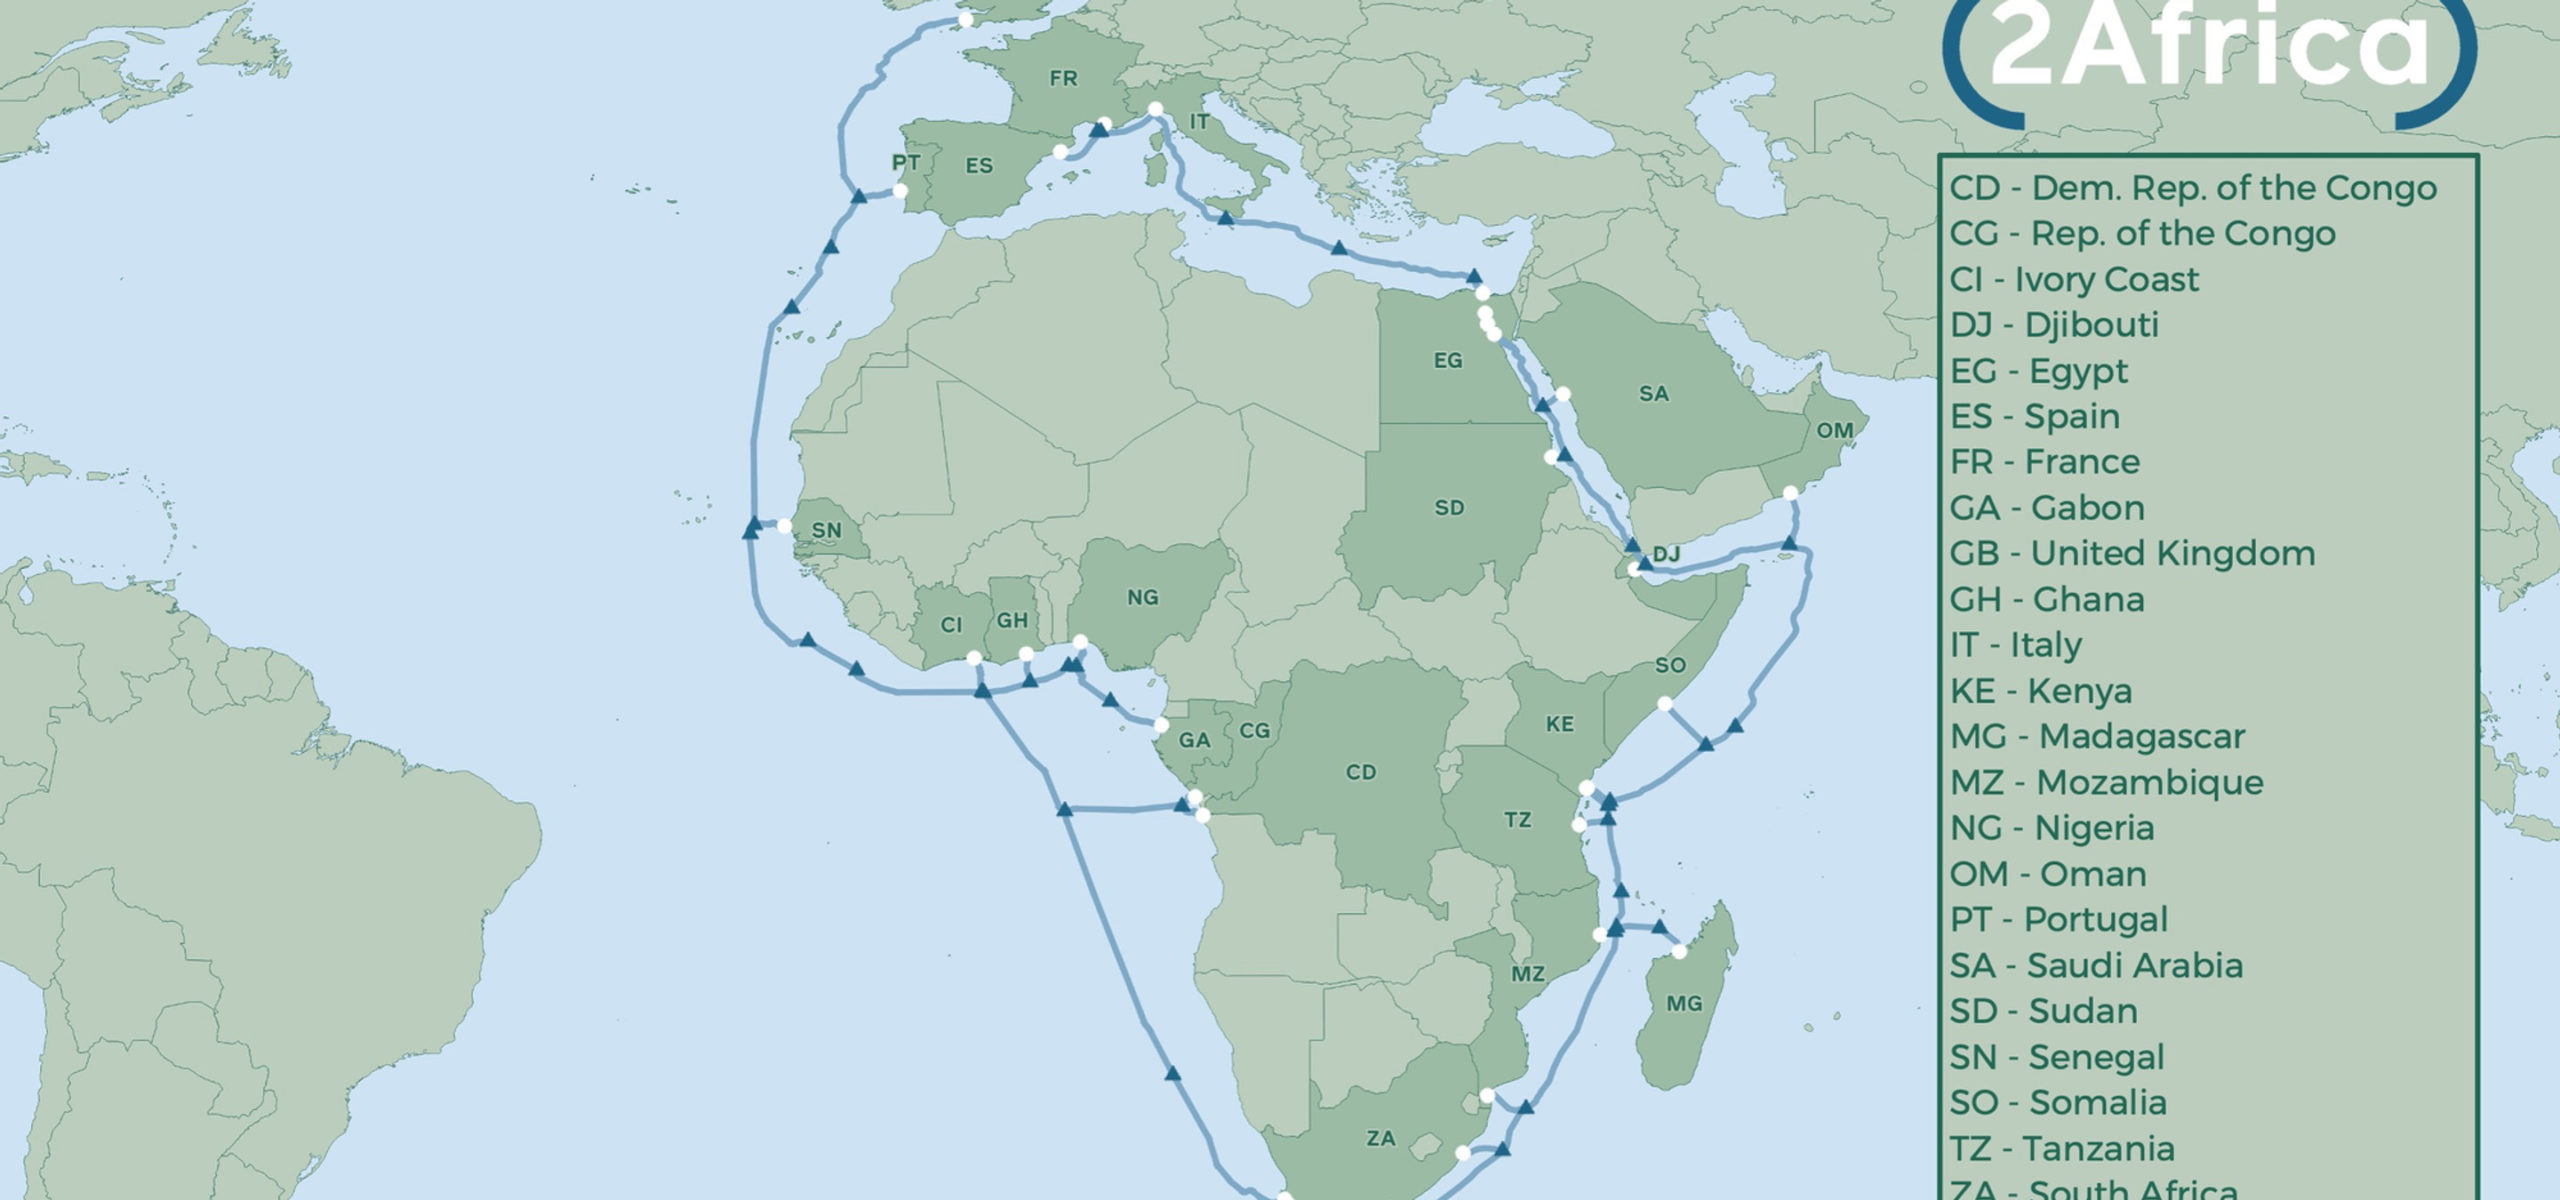 2Africa Announces New Cable Branches to Seychelles, Comoros and Angola